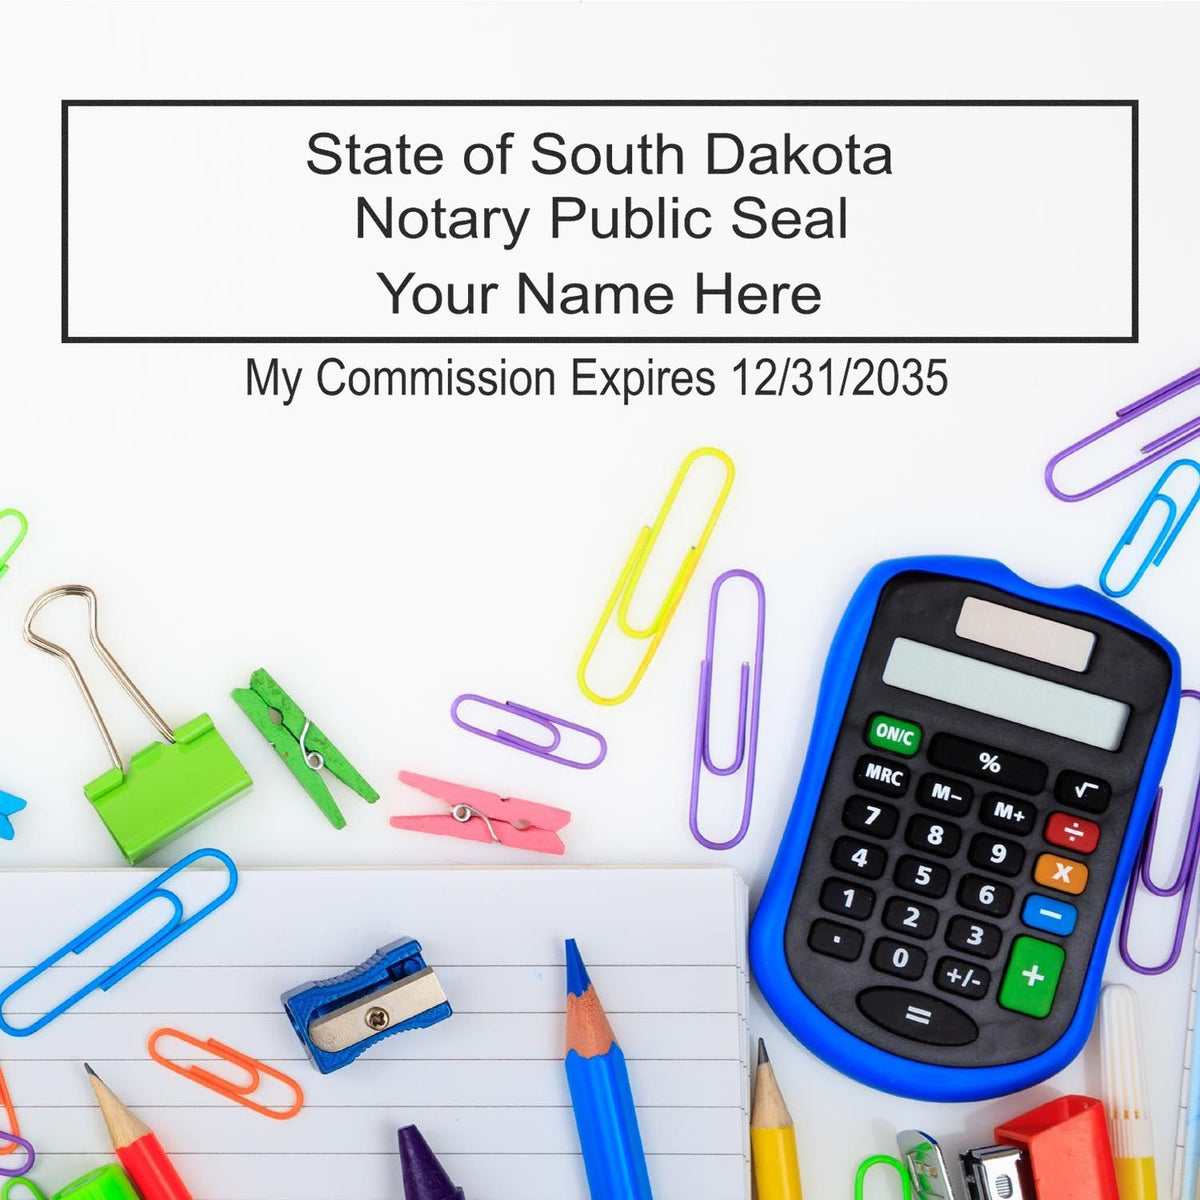 The Super Slim South Dakota Notary Public Stamp stamp impression comes to life with a crisp, detailed photo on paper - showcasing true professional quality.